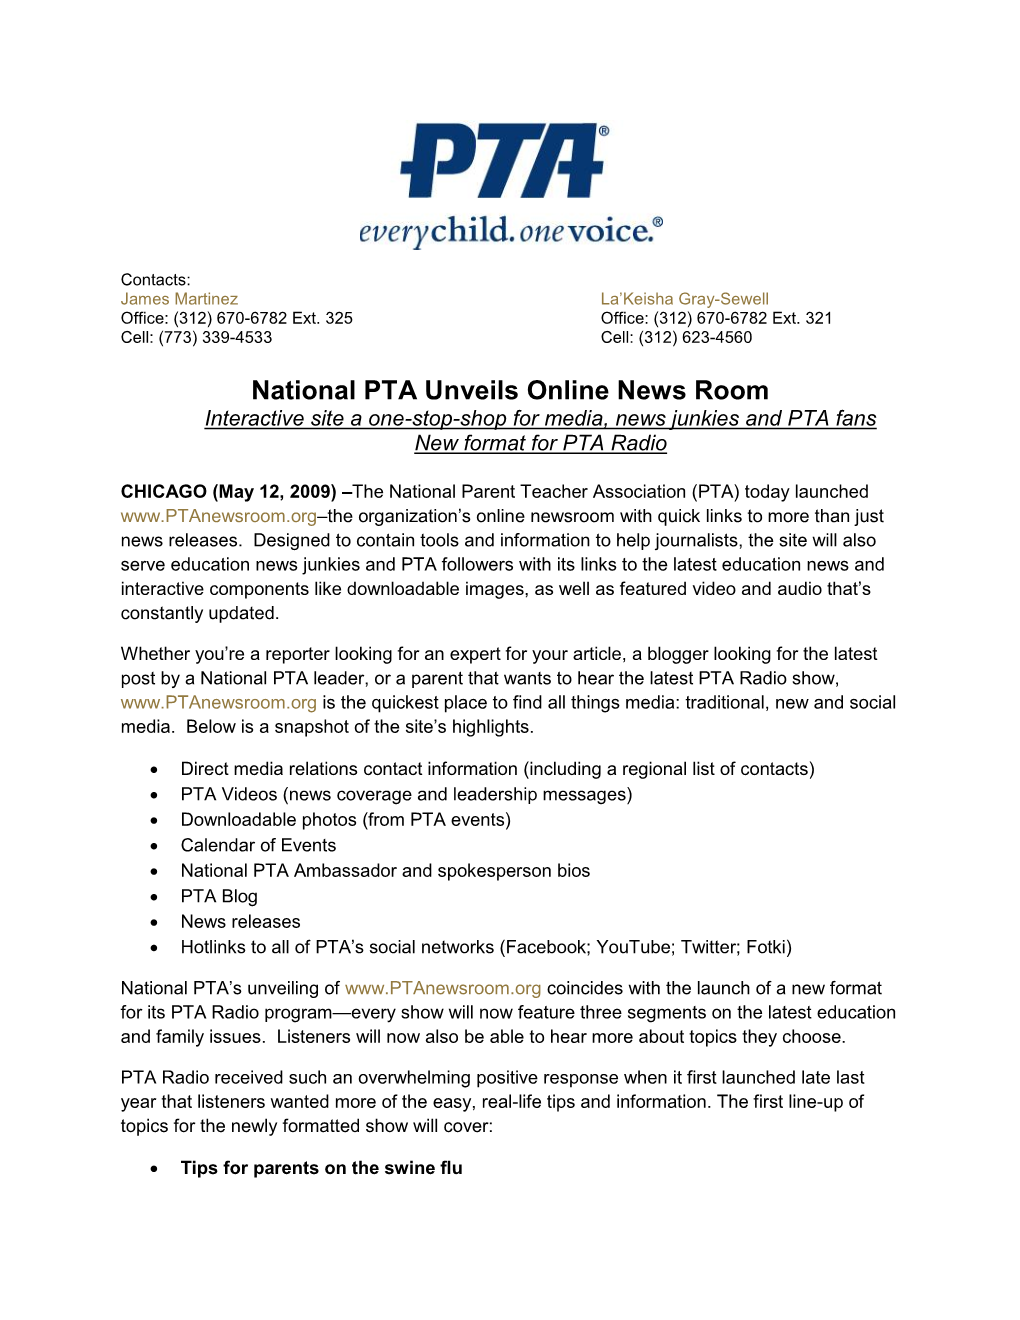 National PTA Unveils Online News Room Interactive Site a One-Stop-Shop for Media, News Junkies and PTA Fans New Format for PTA Radio